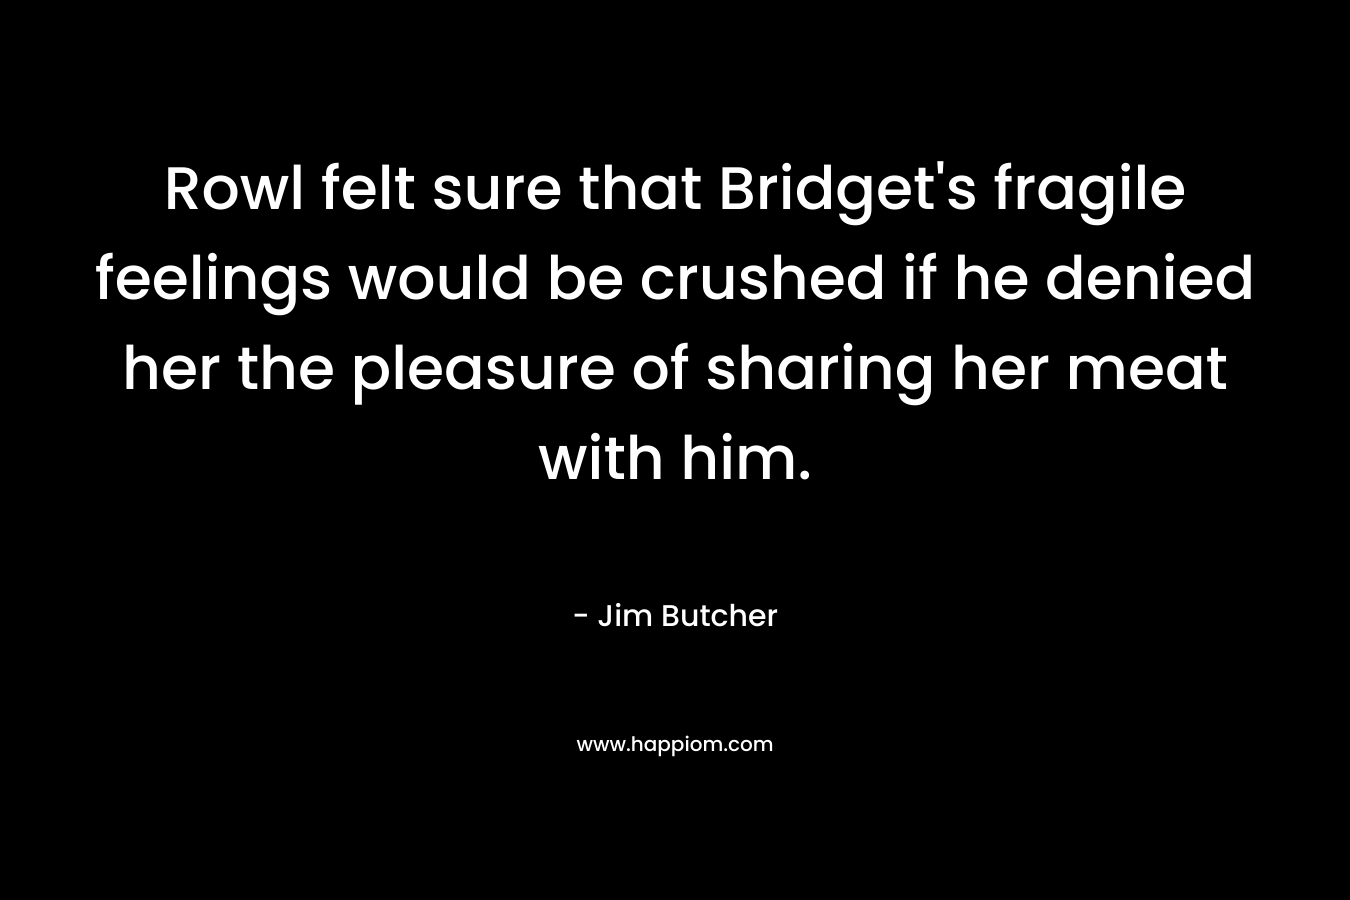 Rowl felt sure that Bridget’s fragile feelings would be crushed if he denied her the pleasure of sharing her meat with him. – Jim Butcher